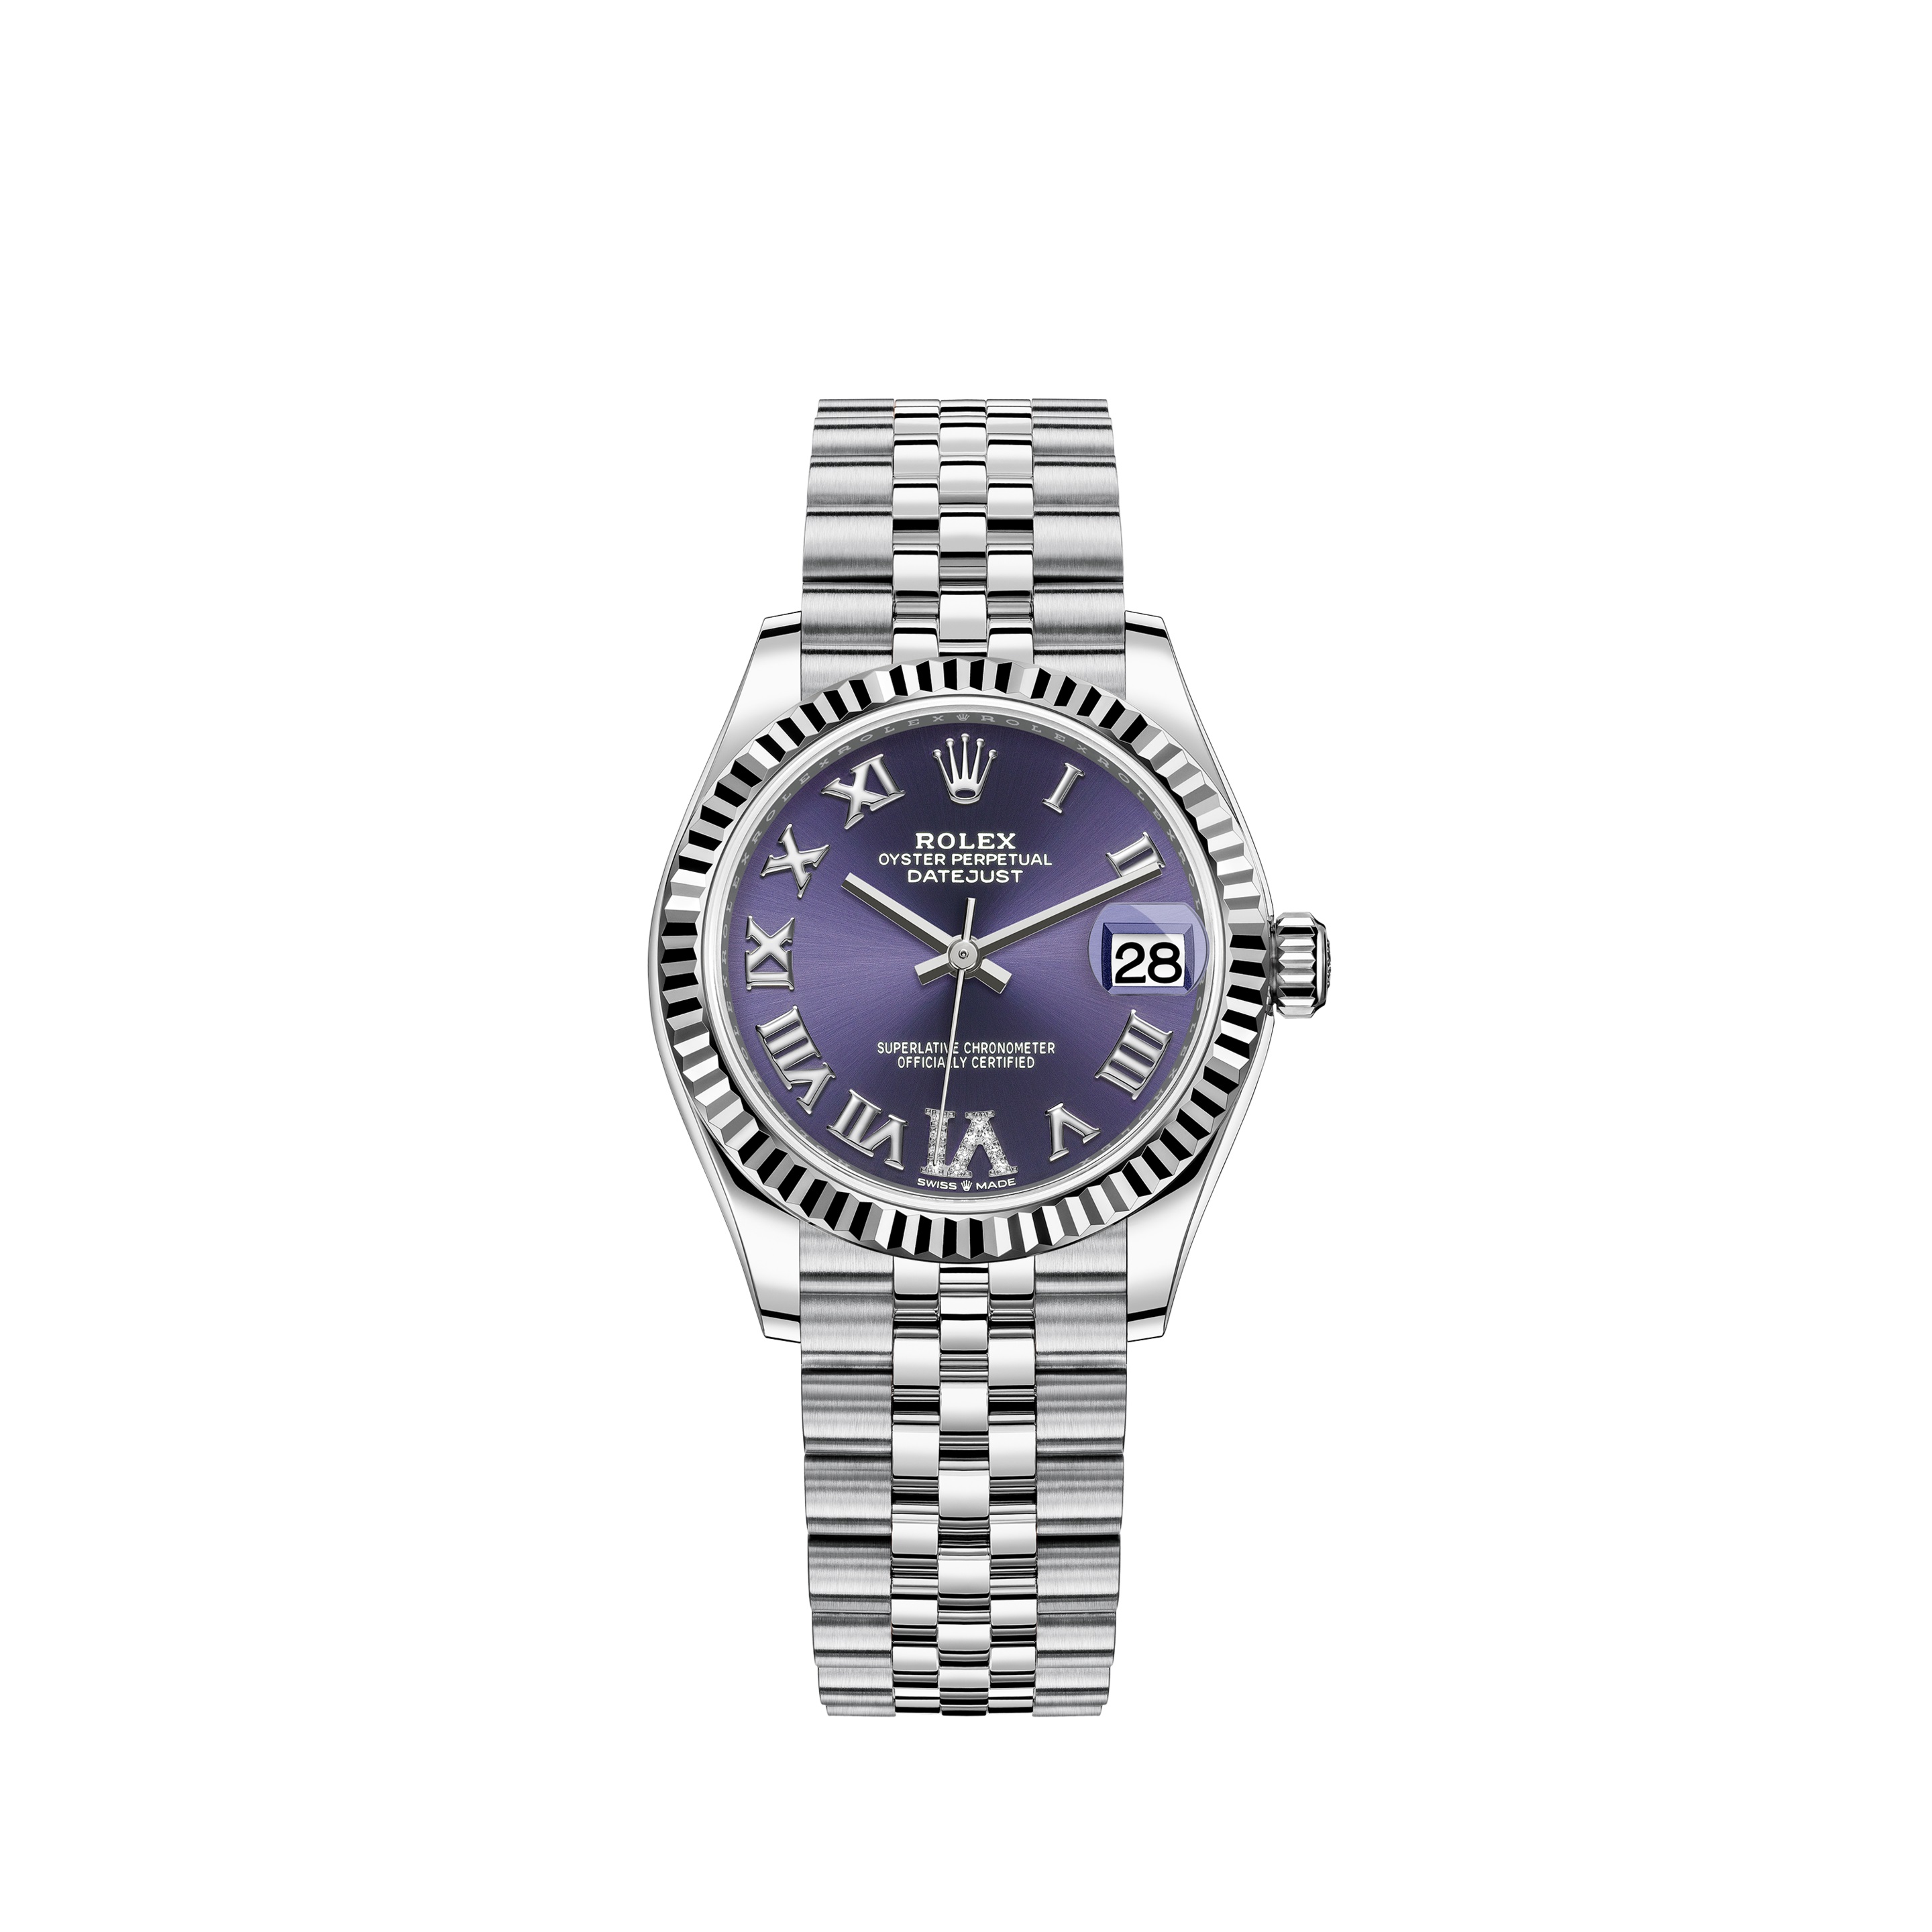 Datejust 31 278274 White Gold & Stainless Steel Watch (Aubergine Set with Diamonds)